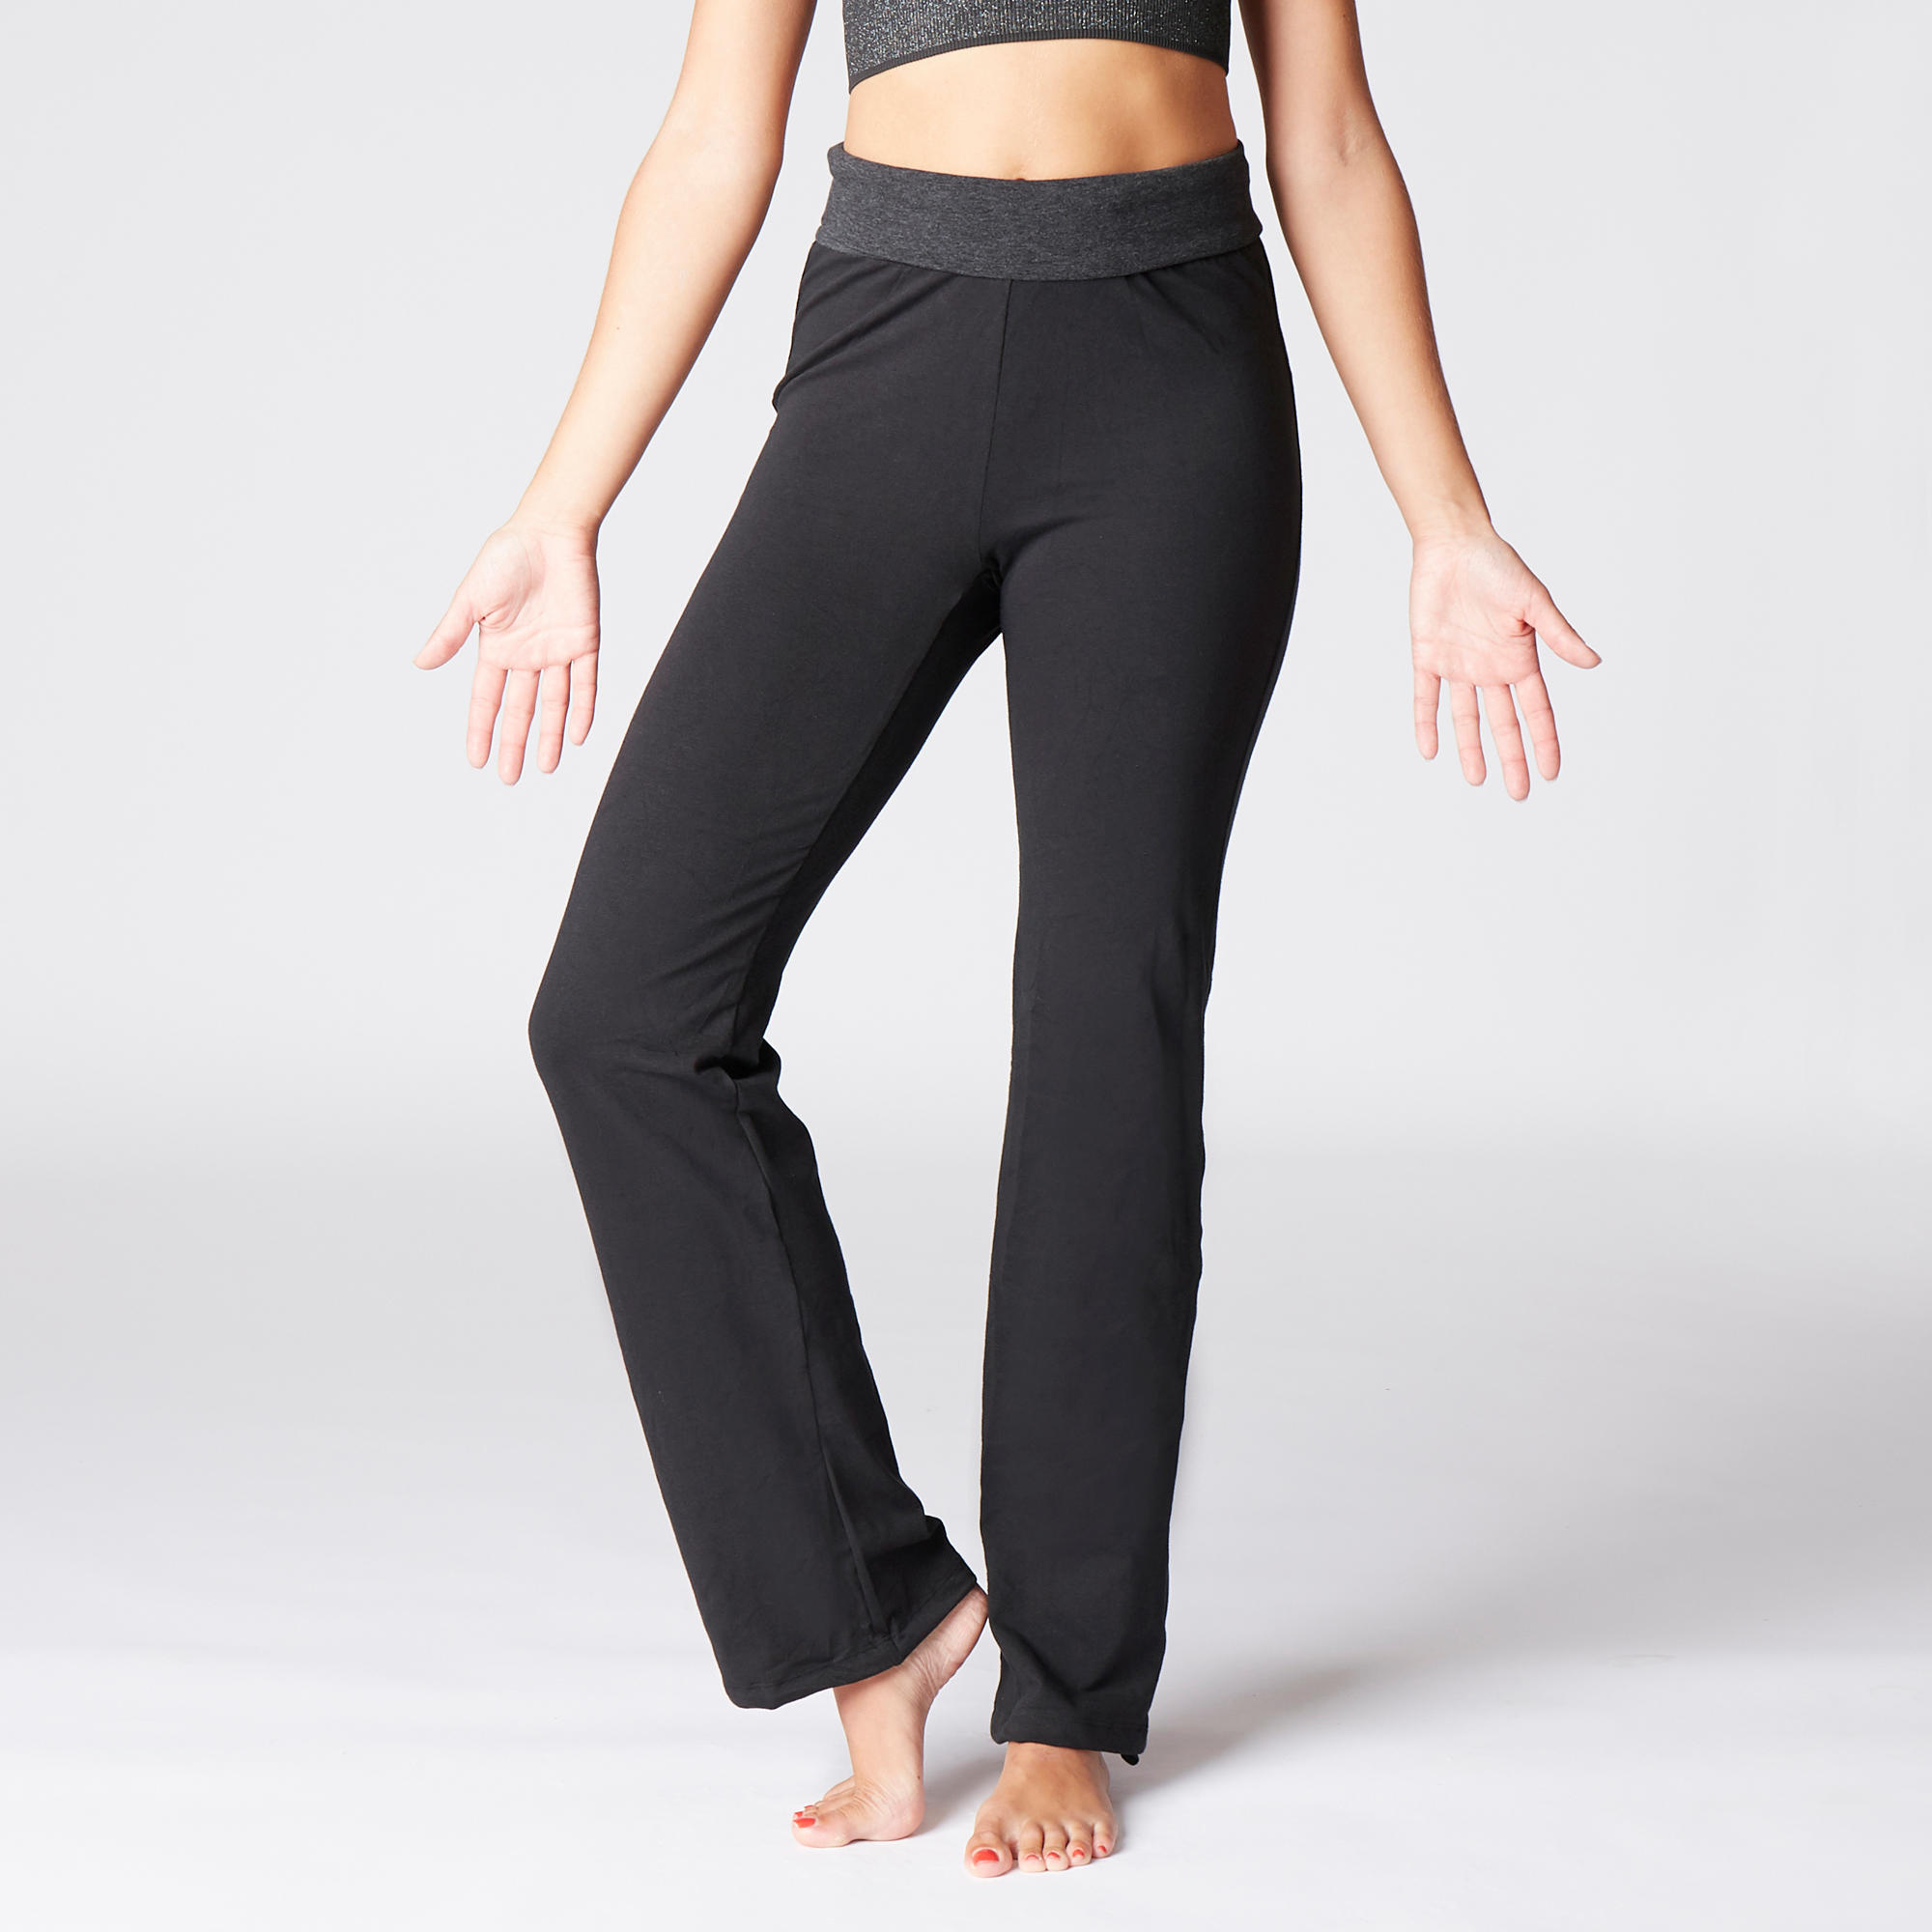 Decathlon Running Leggings Reviews Pants  International Society of  Precision Agriculture